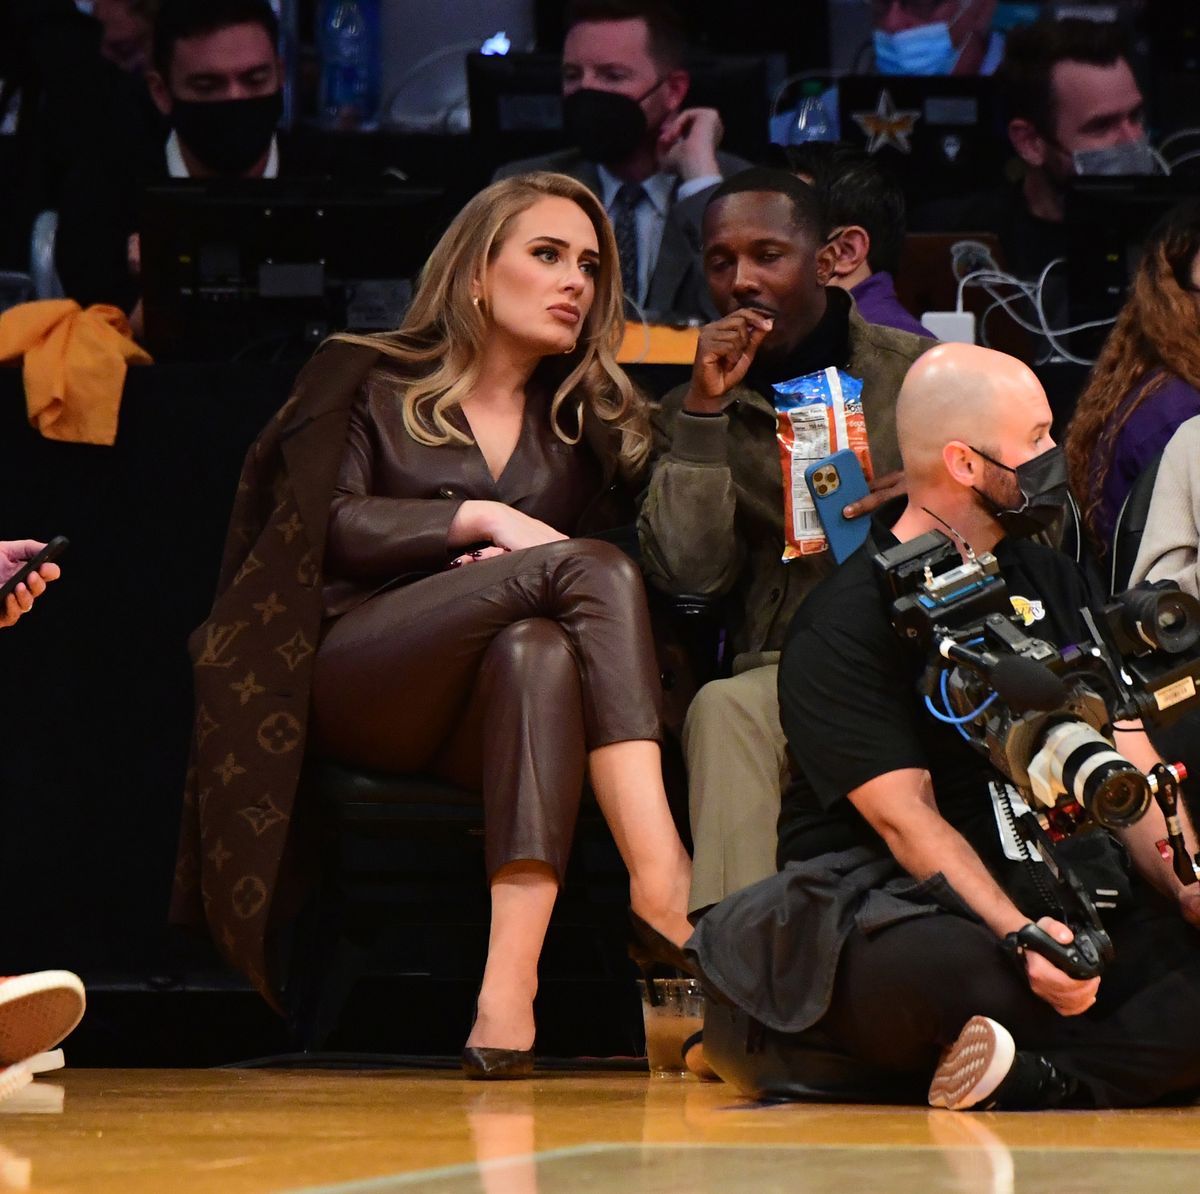 Adele Wore an All-Leather Jumpsuit and Louis Vuitton Coat Courtside